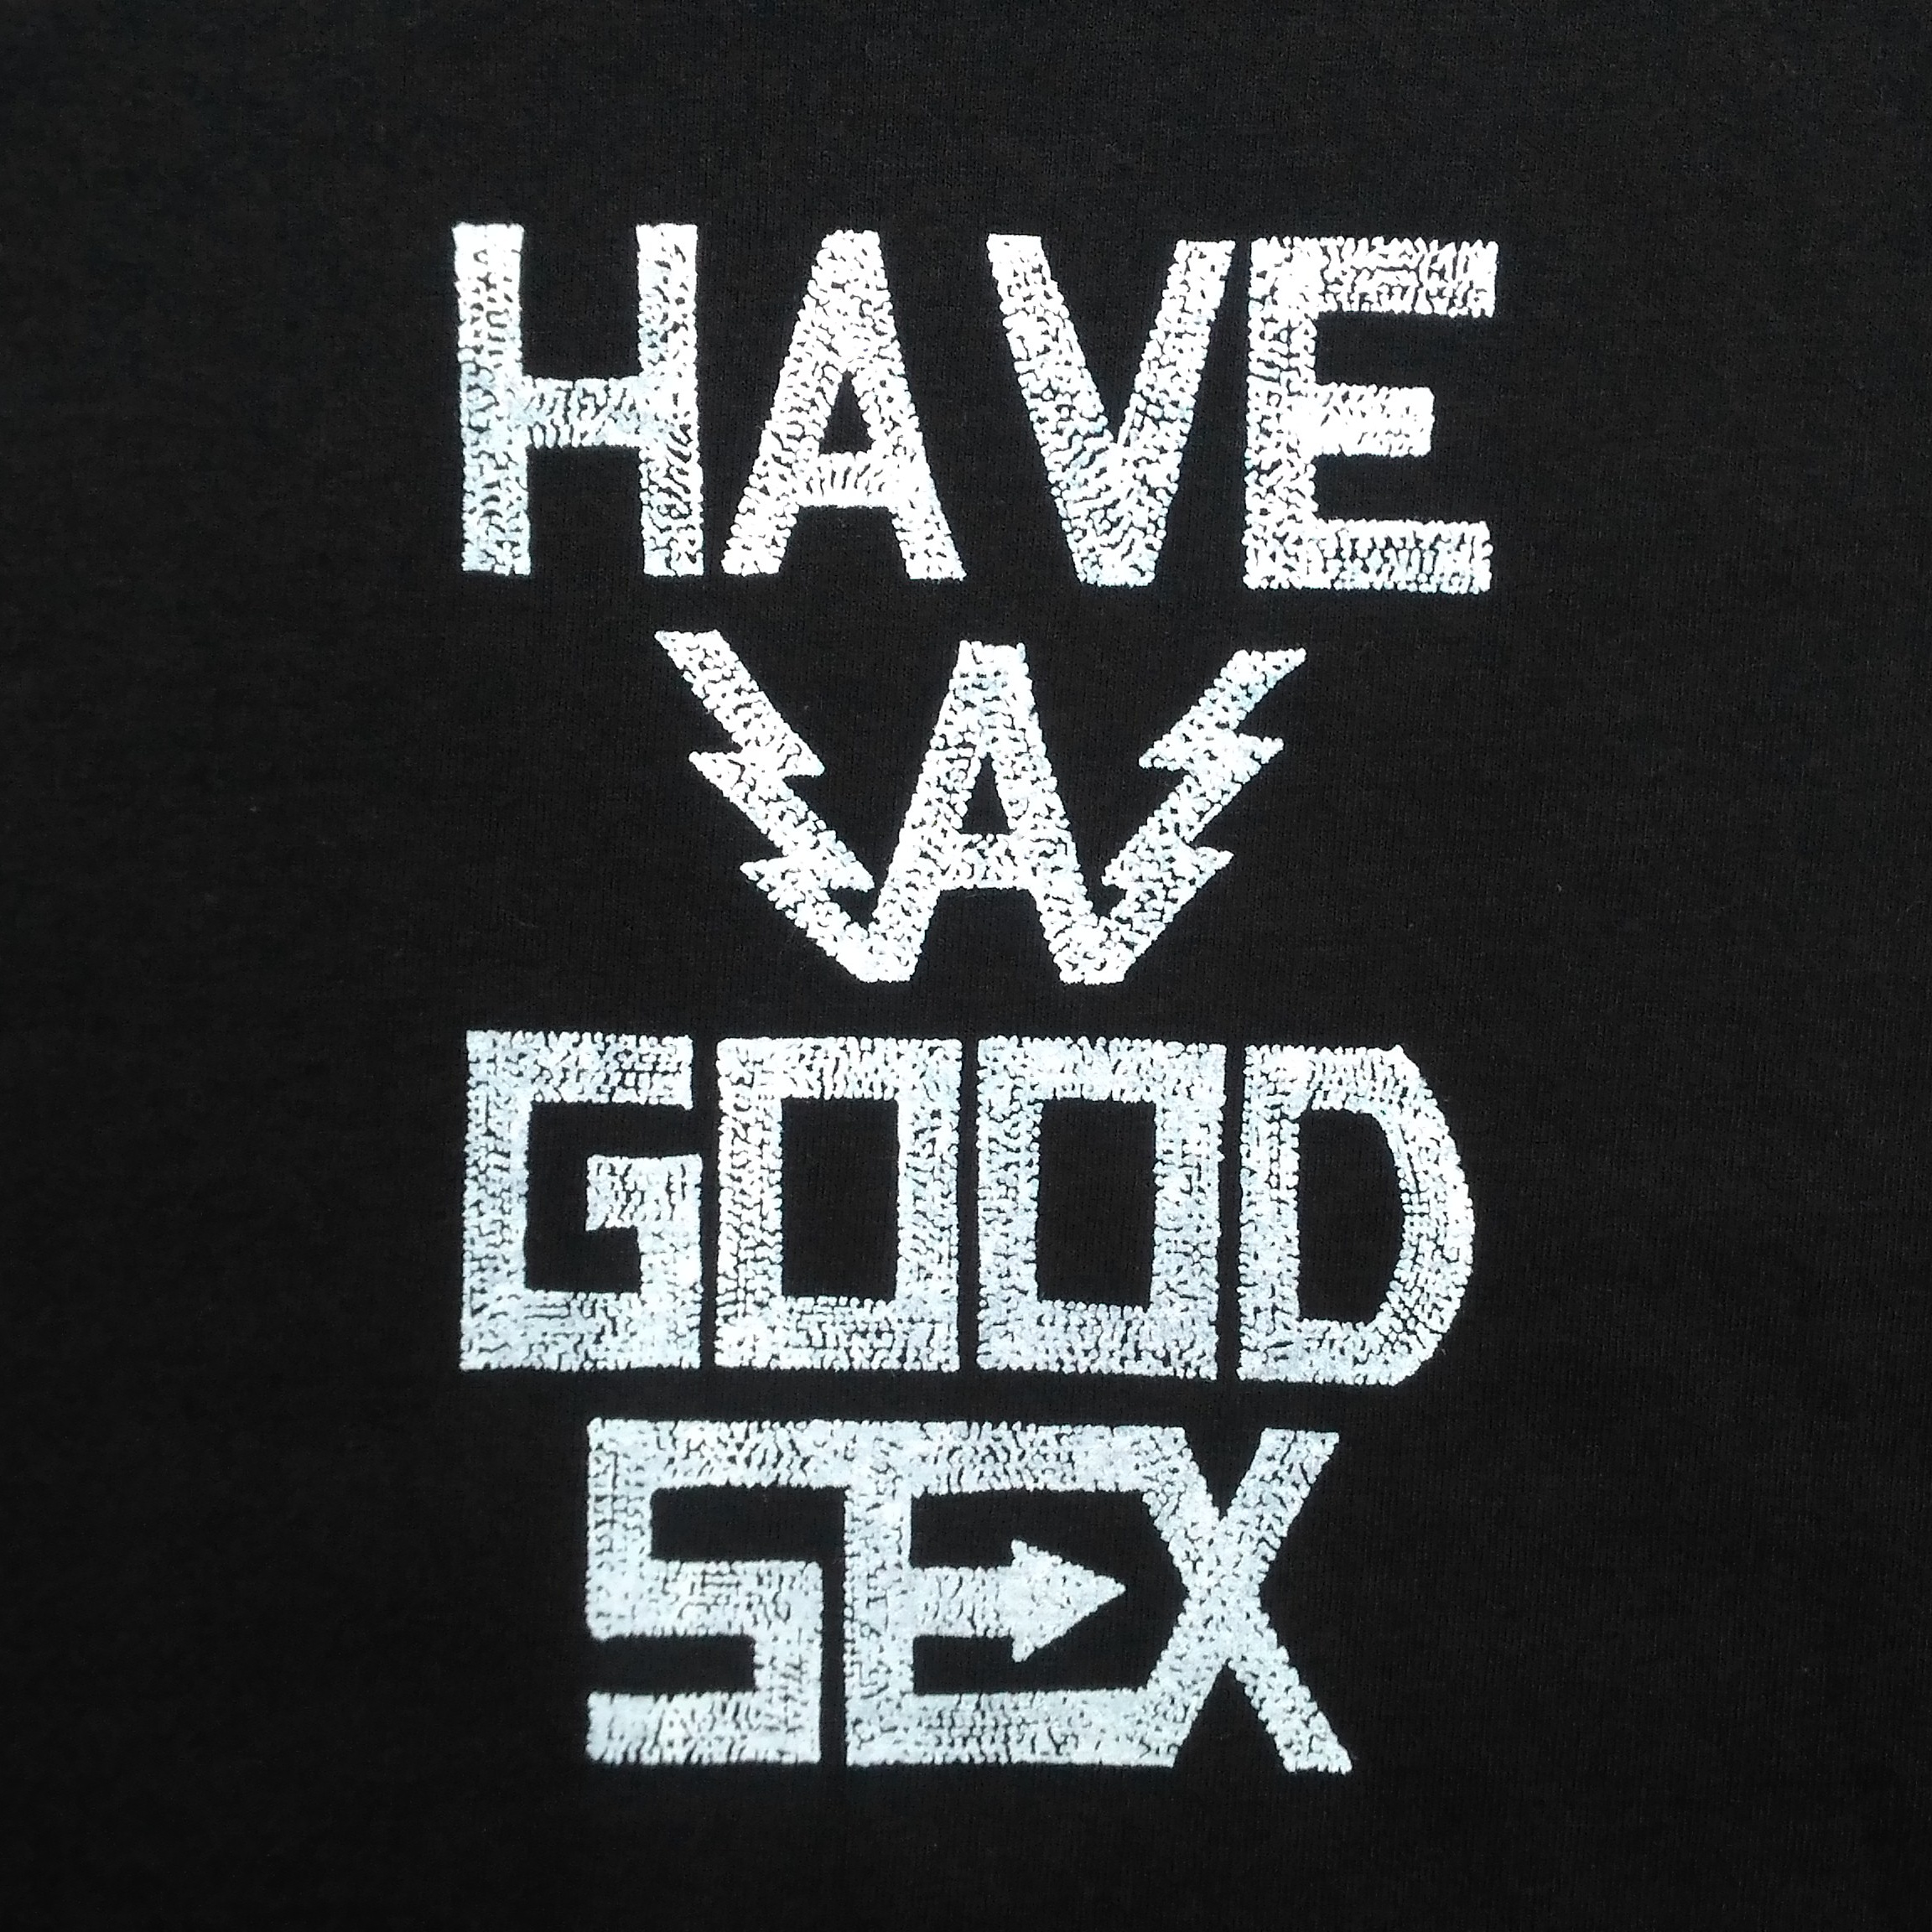 "HAVE A GOOD SEX"